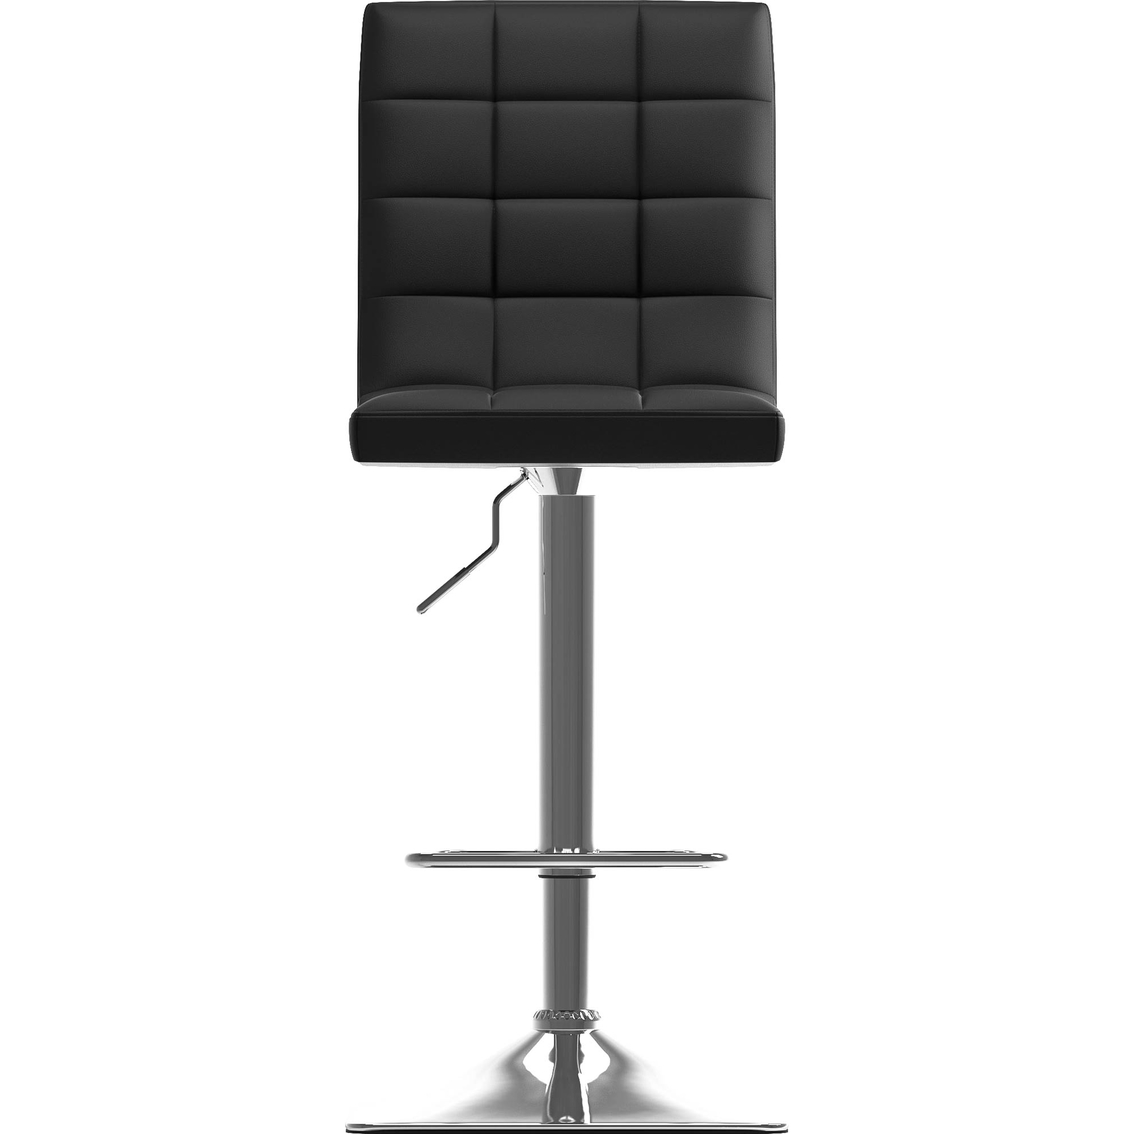 CorLiving Adjustable Barstool in Bonded Leather 2 Pk. - Image 2 of 4